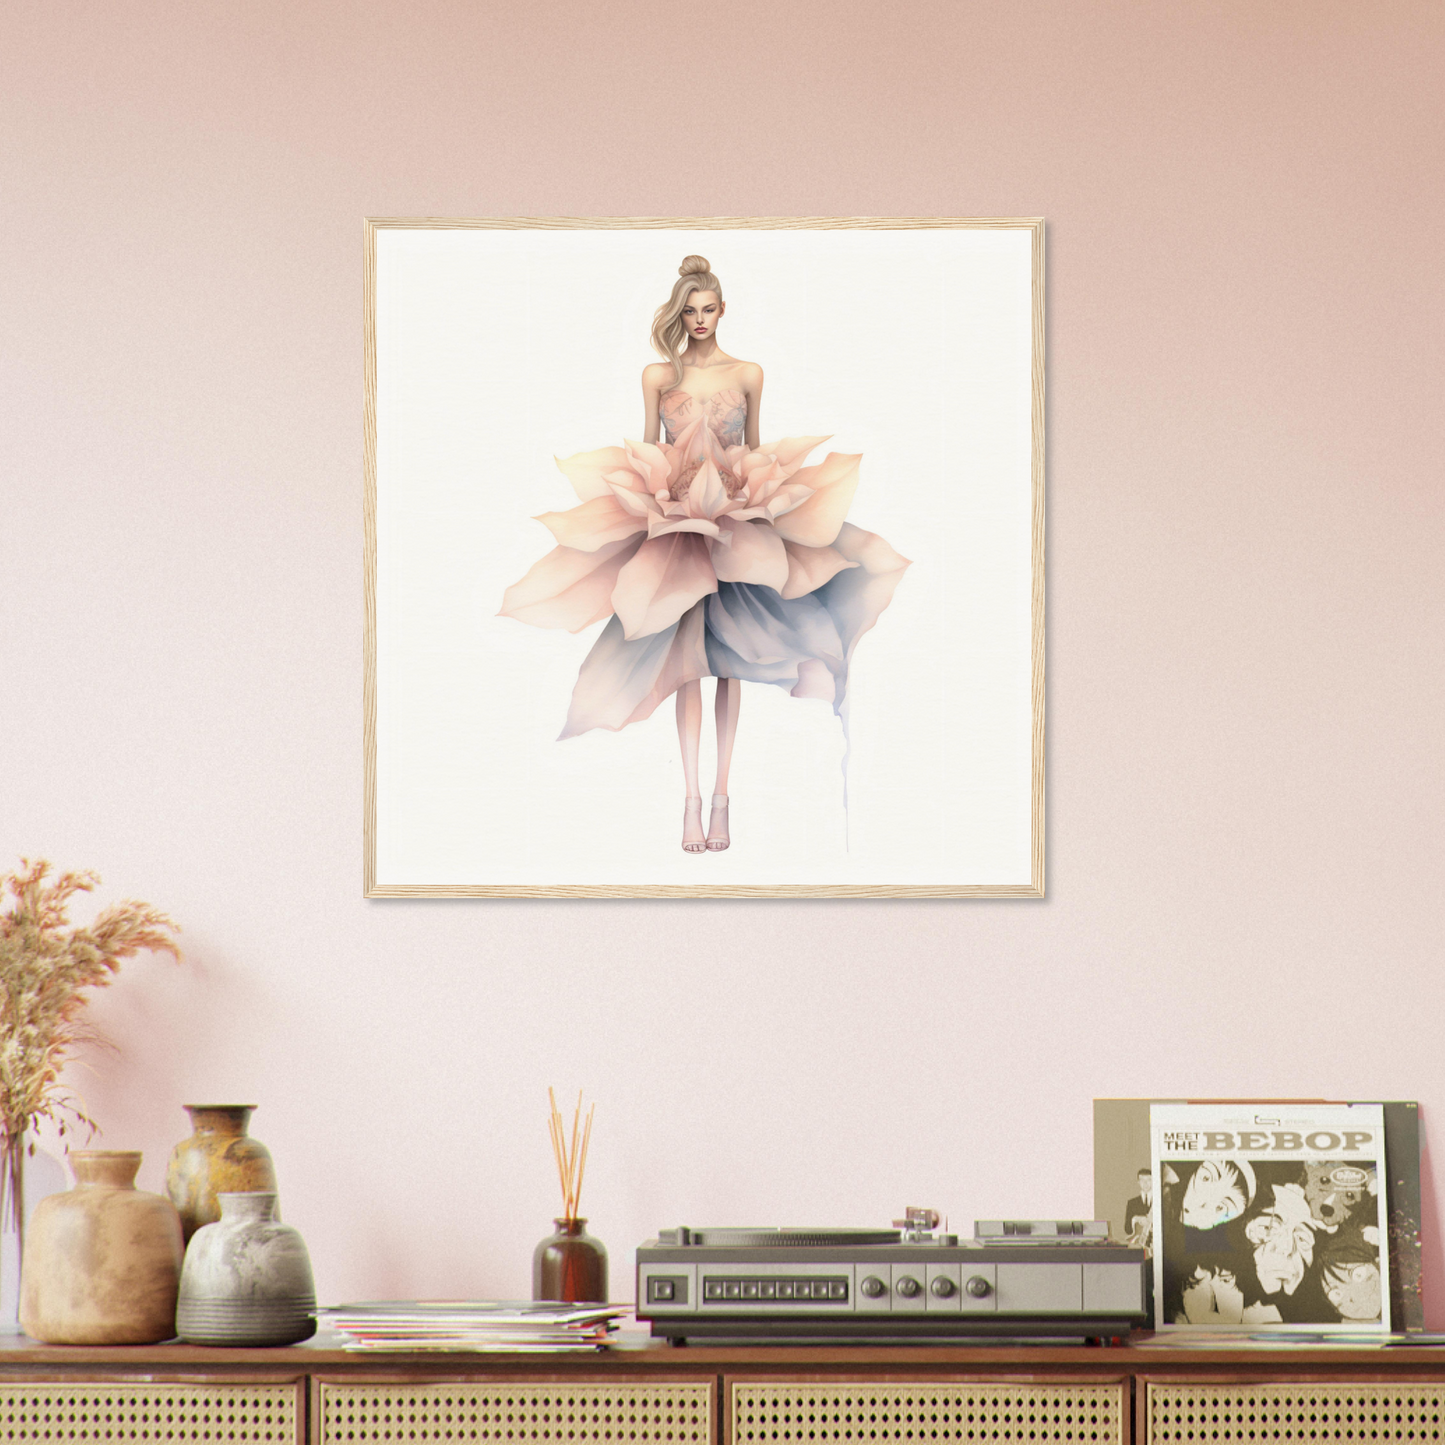 An illustration of a woman in a flower dress, transformed into an "A Flower And A Lover Aquarelles D The Oracle Windows™ Collection" art, perfect to decorate your space.